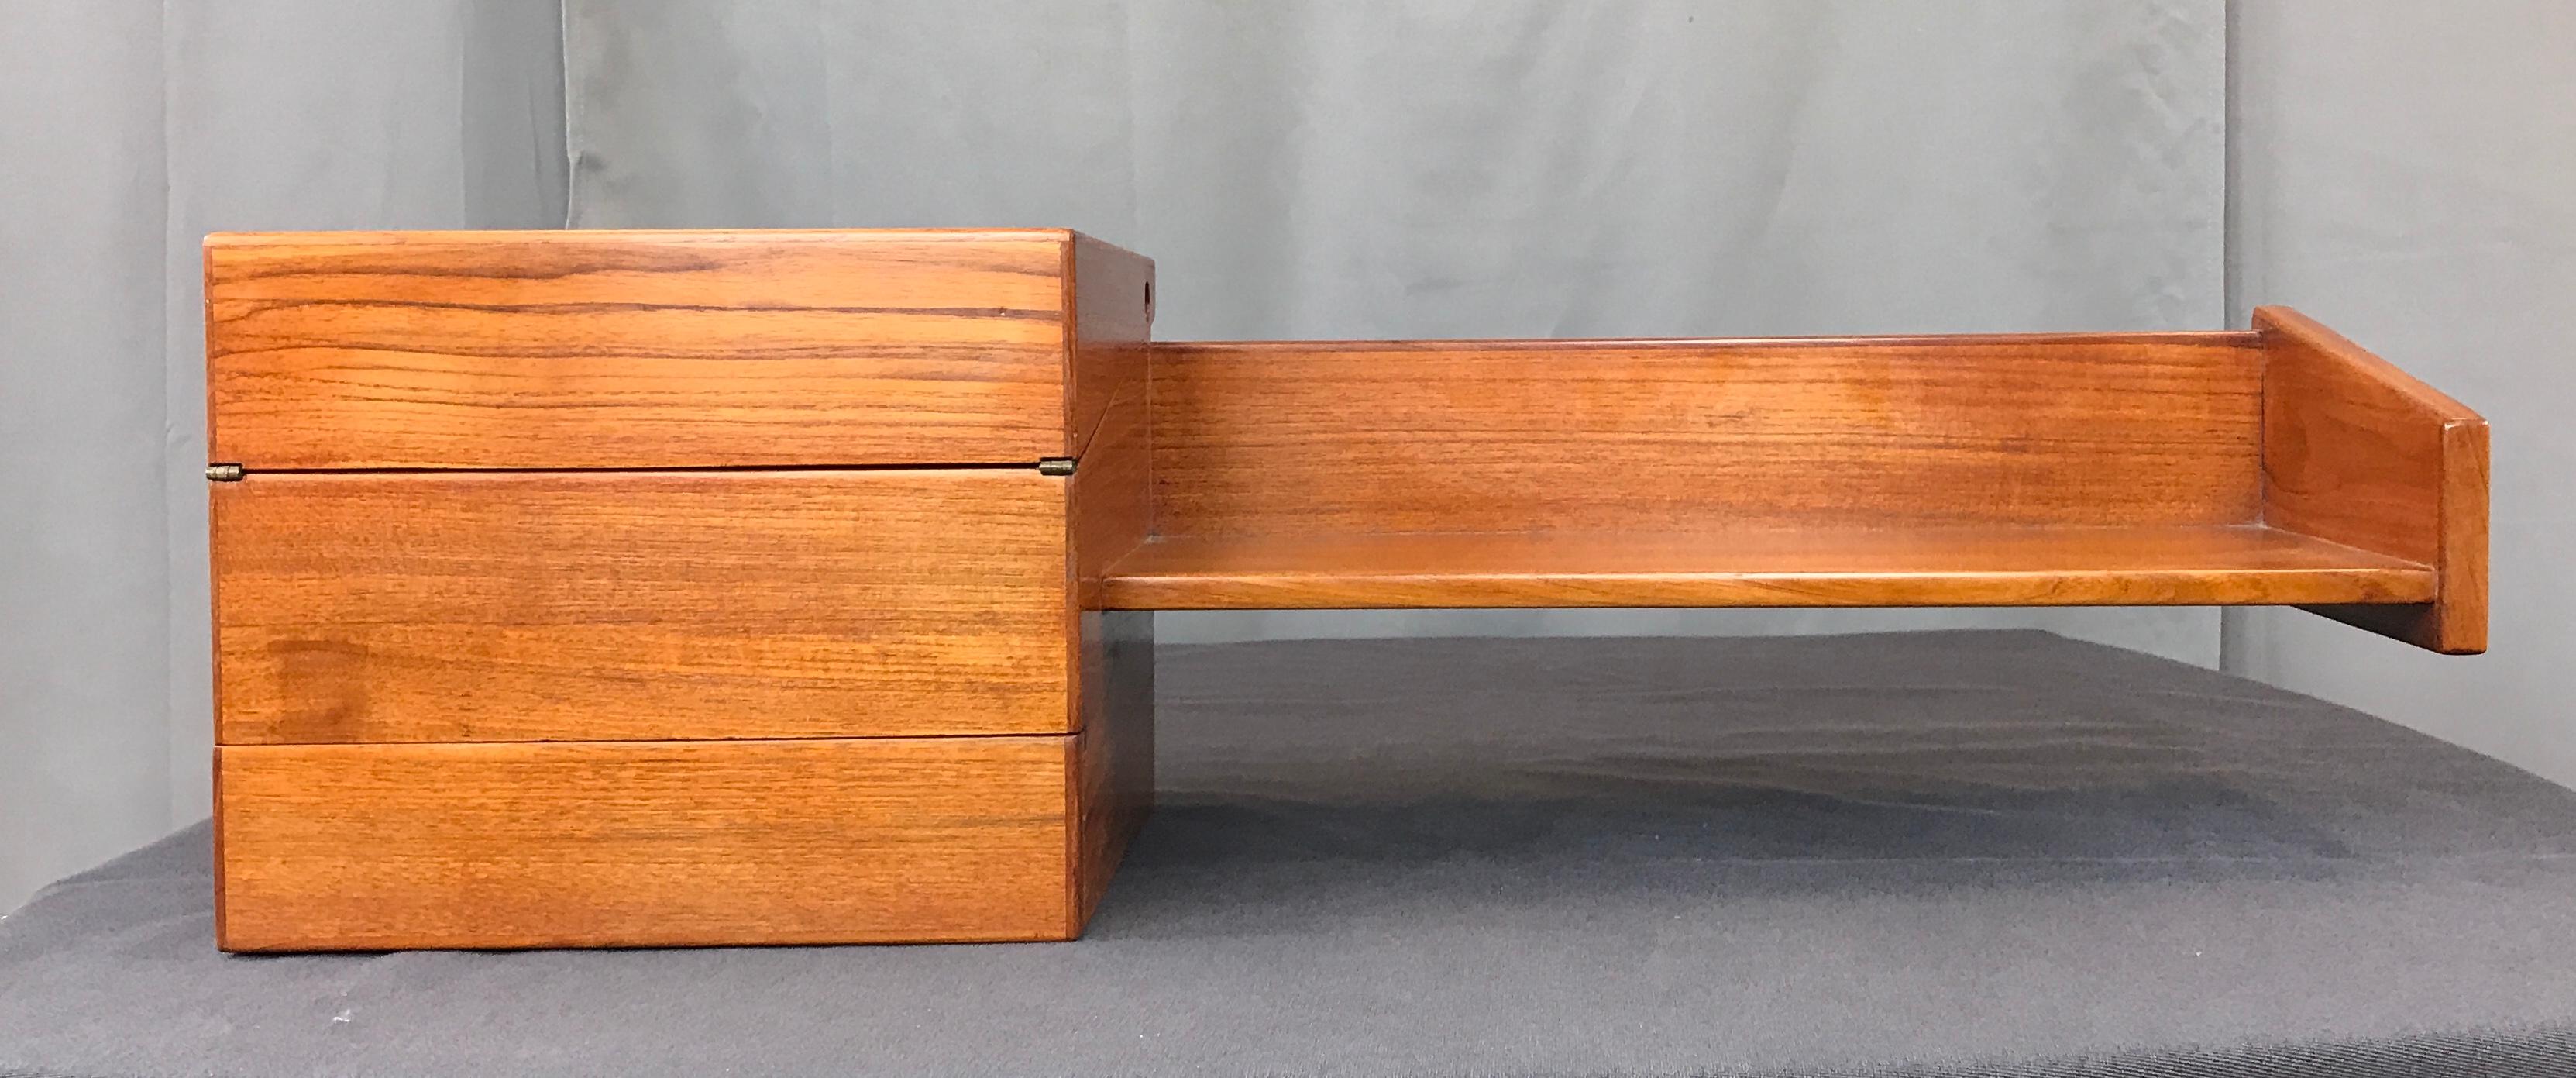 A Mogens Kold Teak floating shelf and desk, made in Denmark. A floating shelf on the right, attached to it on the left, a cube, with a drawer on the bottom. Top half flips over to reveal a chamber, with the lid that can be use as a small desk,